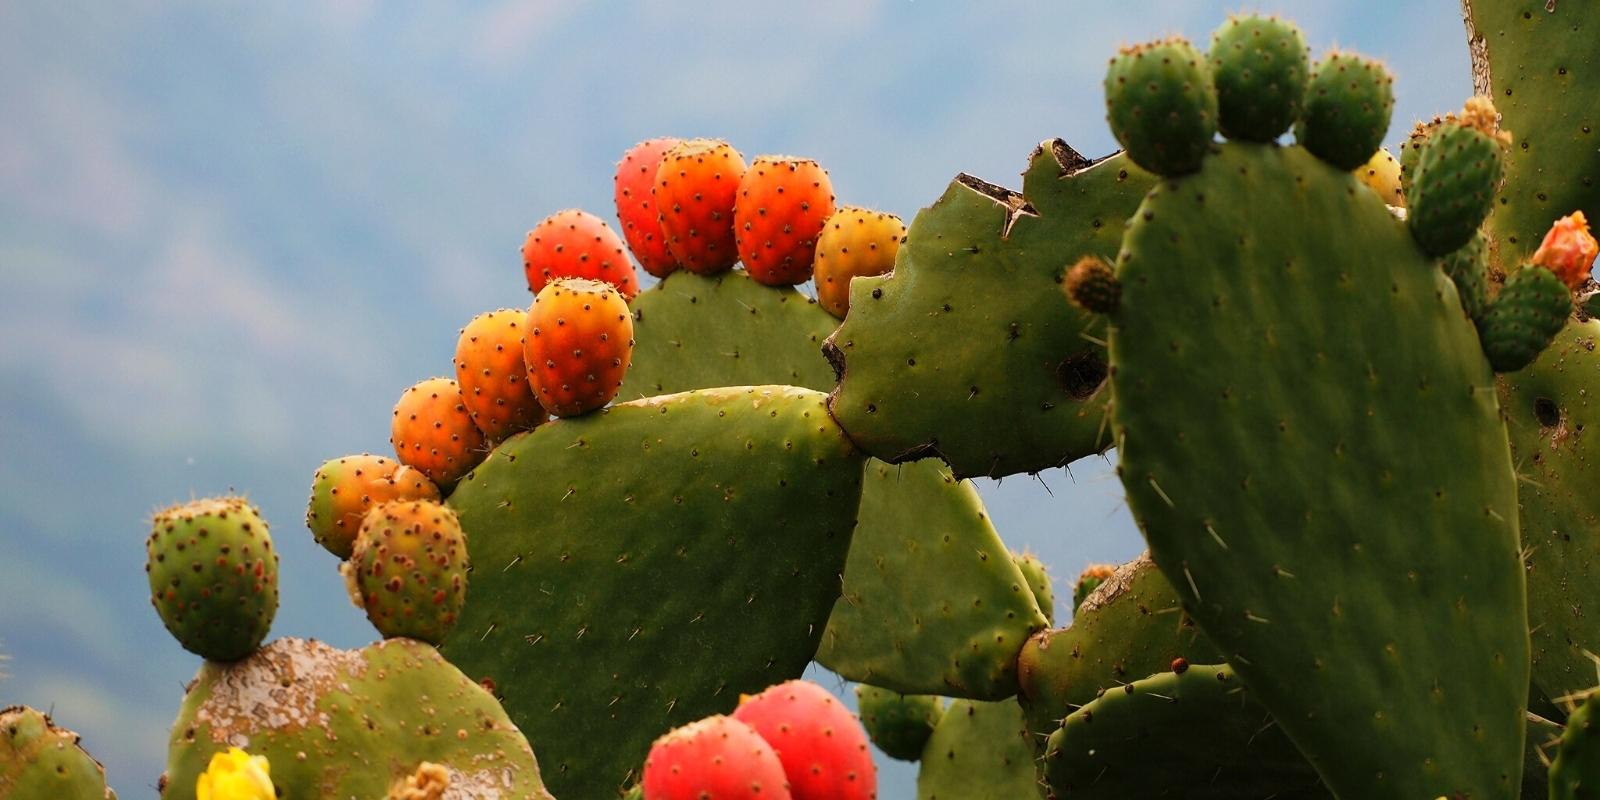 THE PRICKLY PEAR (OPUNTIA FICUS INDICA)